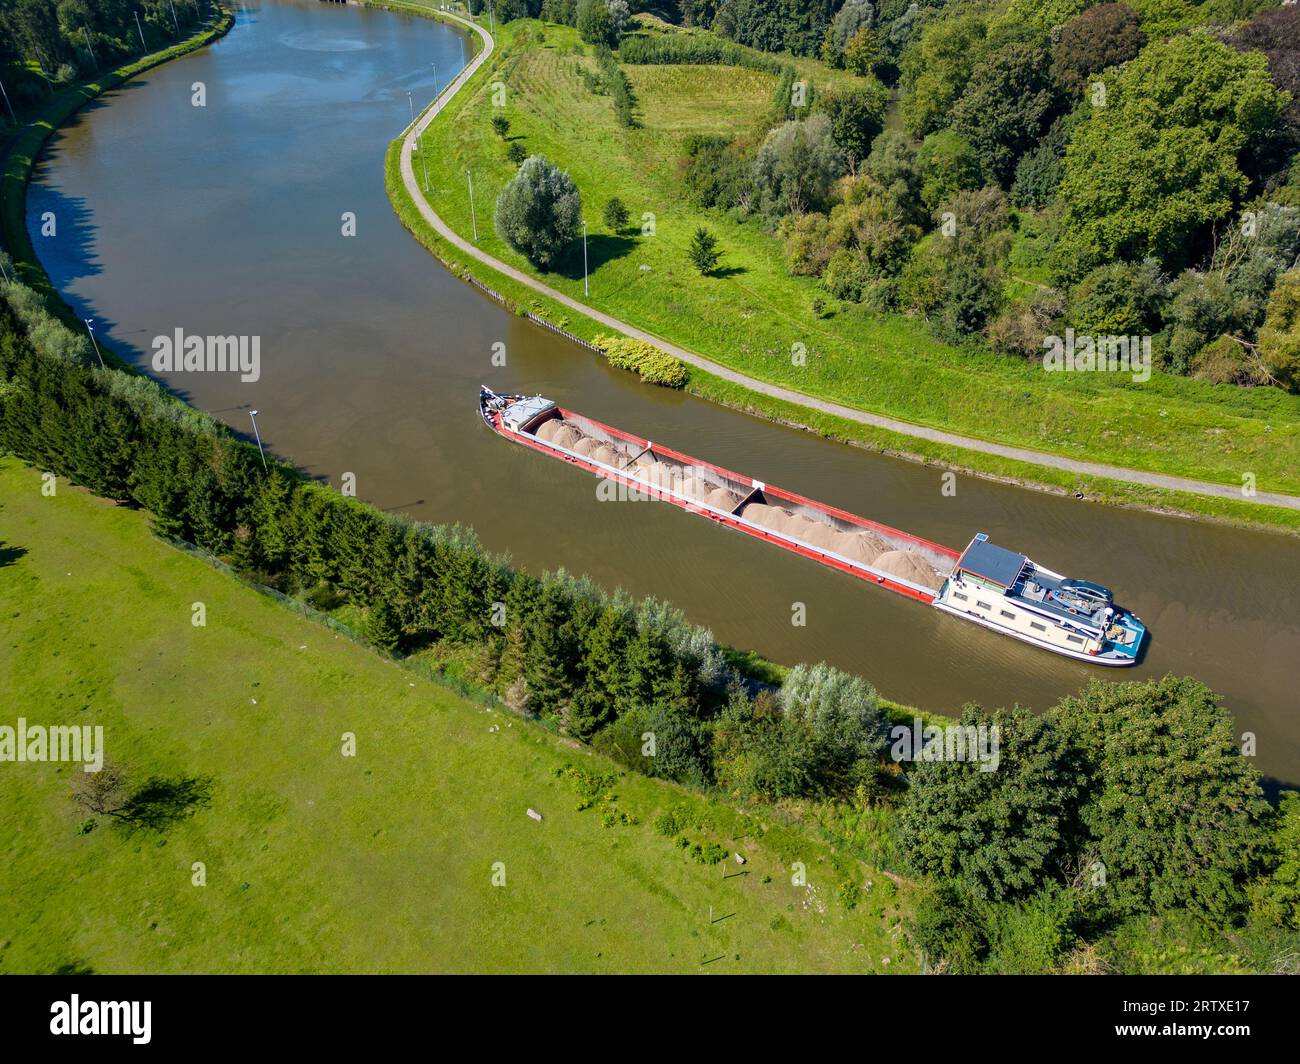 Lembeek, Halle, Vlaams Brabant, Belgium,Sep 5th 2023, cargo ship or barge passing on the Canal Brussels Charleroi, which is a man made waterway in Belgium. It's still in active use in transporting goods and raw material. High quality photo Stock Photo